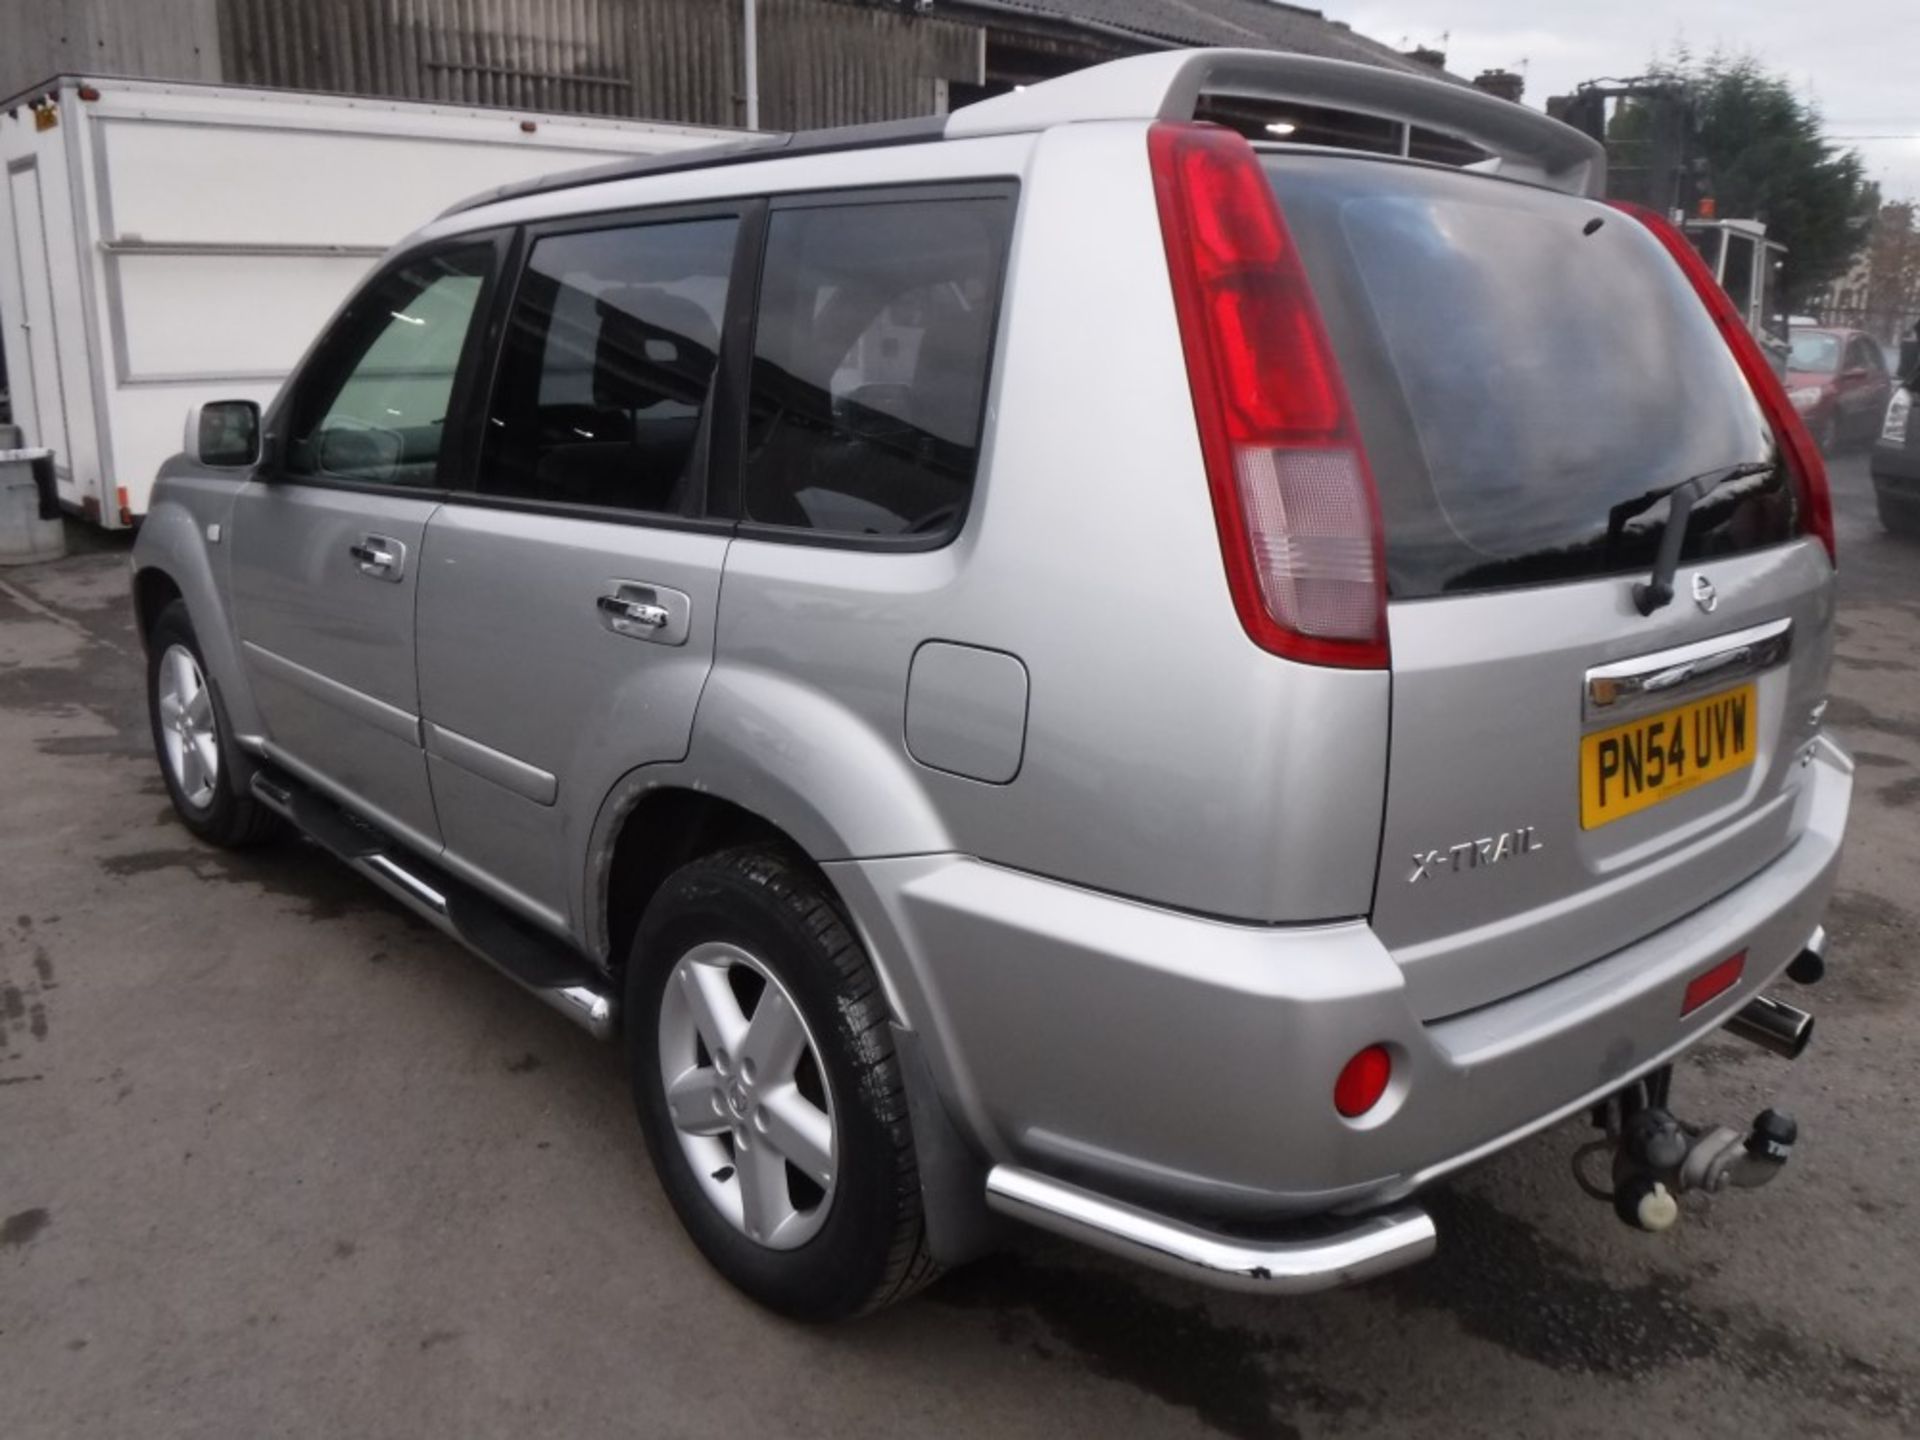 54 reg NISSAN X-TRAIL SPORT DCI, 1ST REG 09/04, TEST 03/18, 115569M, V5 HERE, 3 FORMER KEEPERS [NO - Image 3 of 5